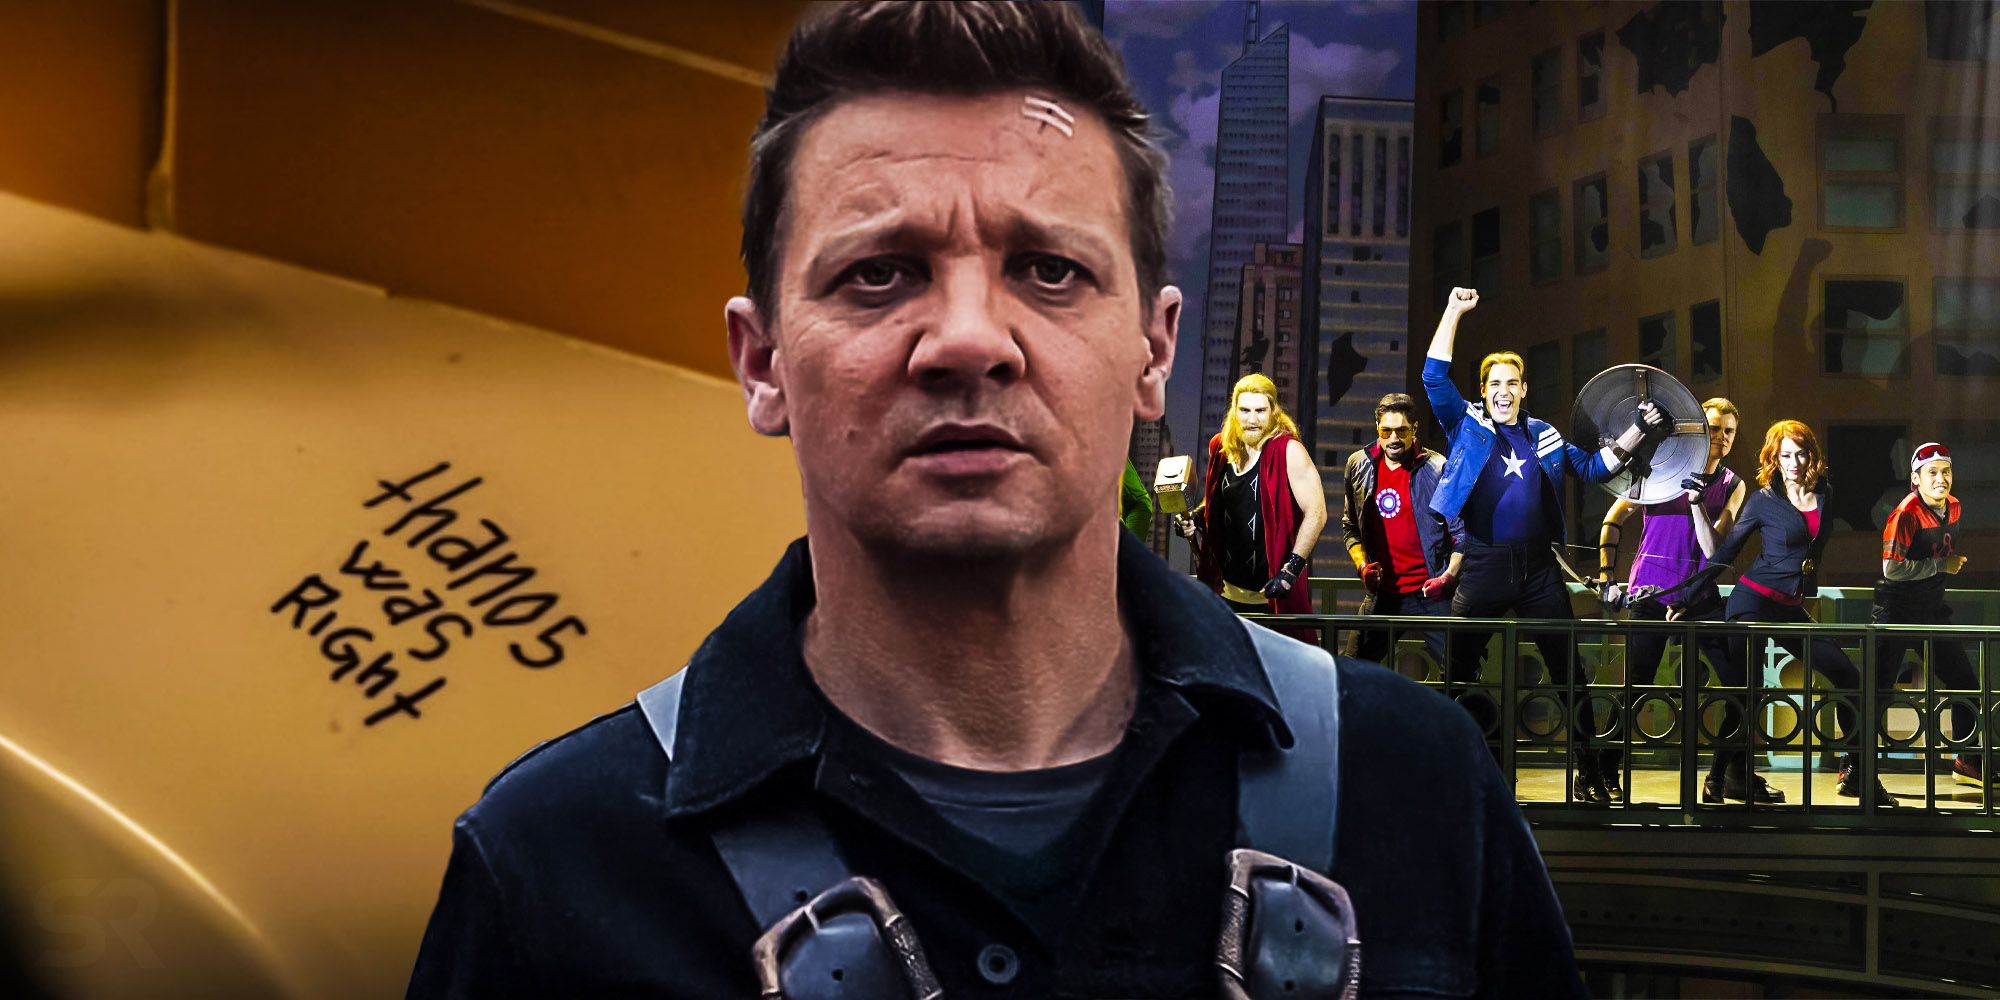 Hawkeye thanos was right graffiti subtle insult to rogers musical